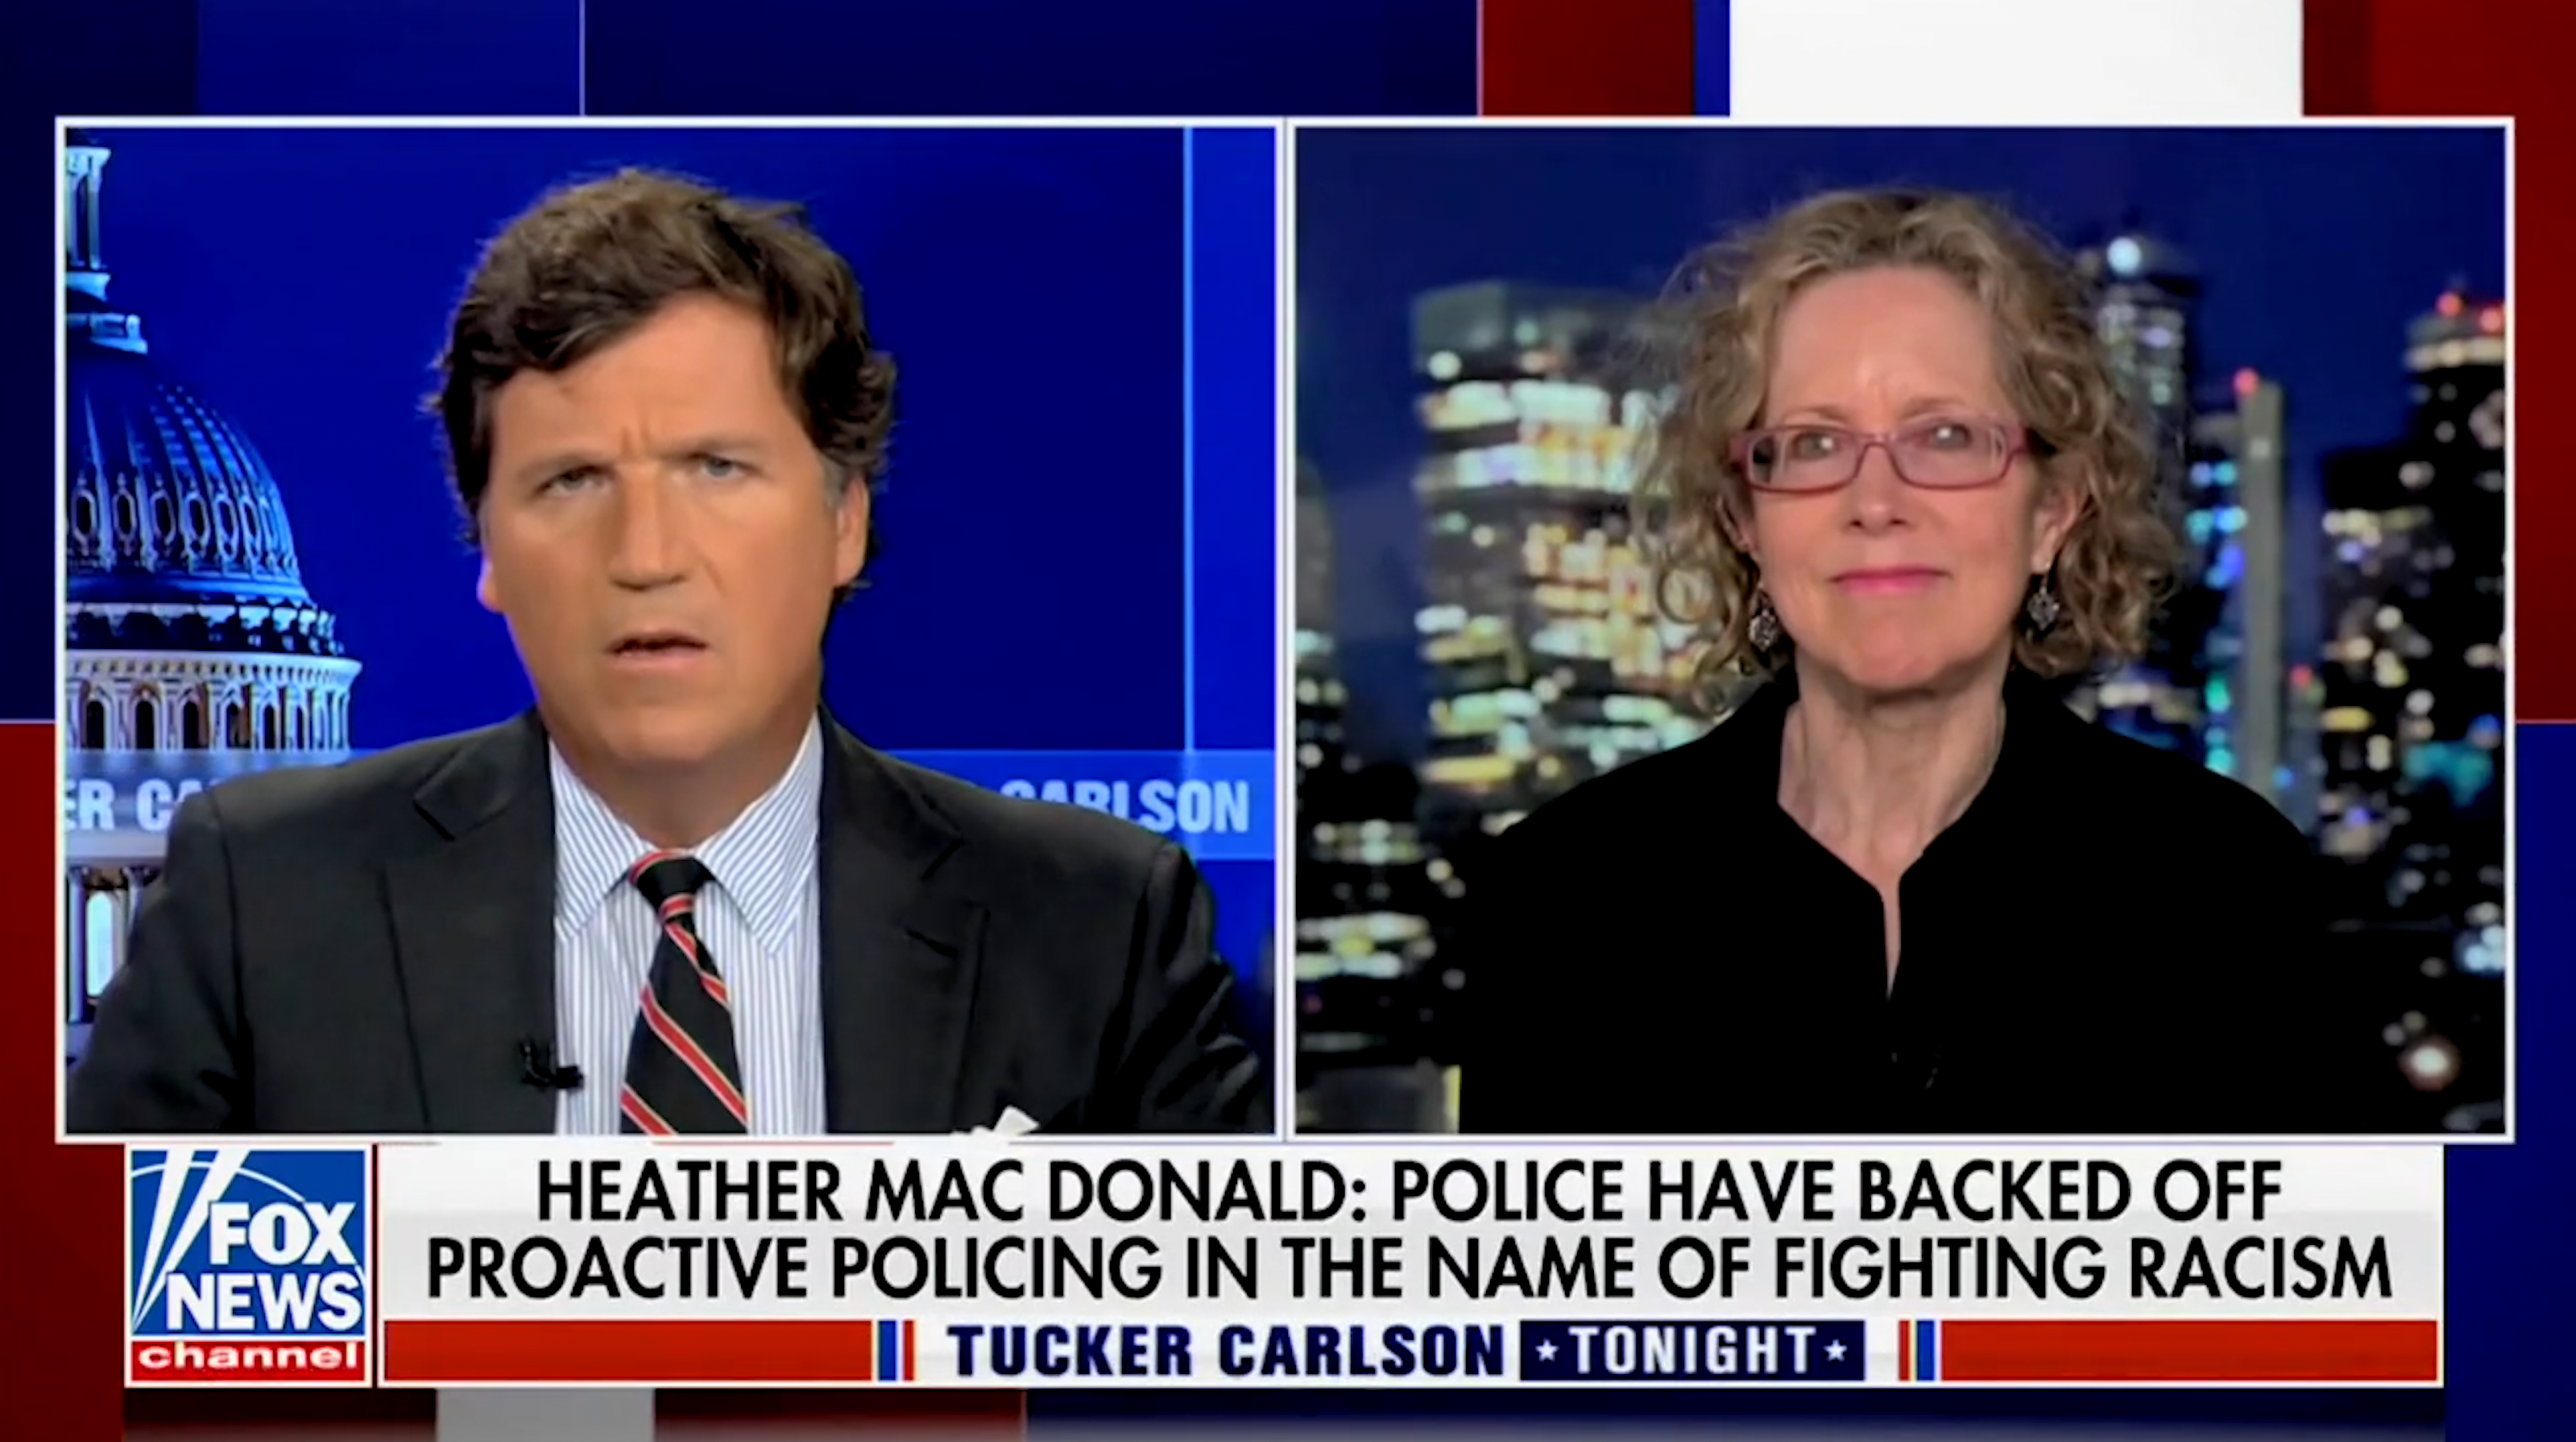 Heather Mac Donald On Mass Acts Of Lawlessness: This Is What Happens When Leftists Call Police ‘Racist’